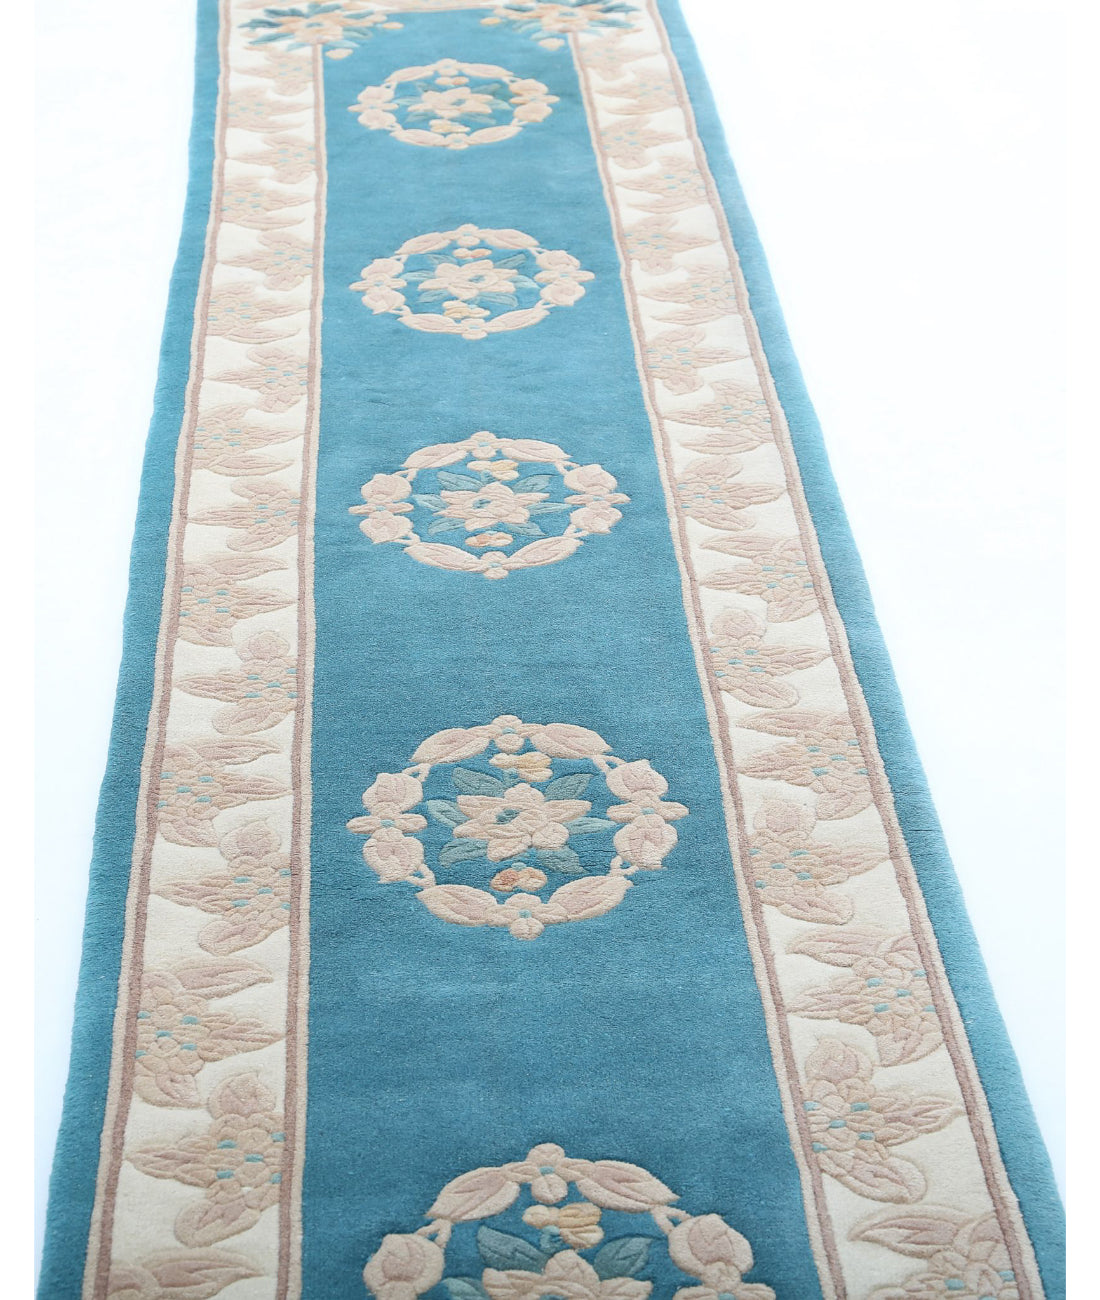 Chinese 2'3'' X 11'11'' Hand-Knotted Wool Rug 2'3'' x 11'11'' (68 X 358) / Blue / Ivory